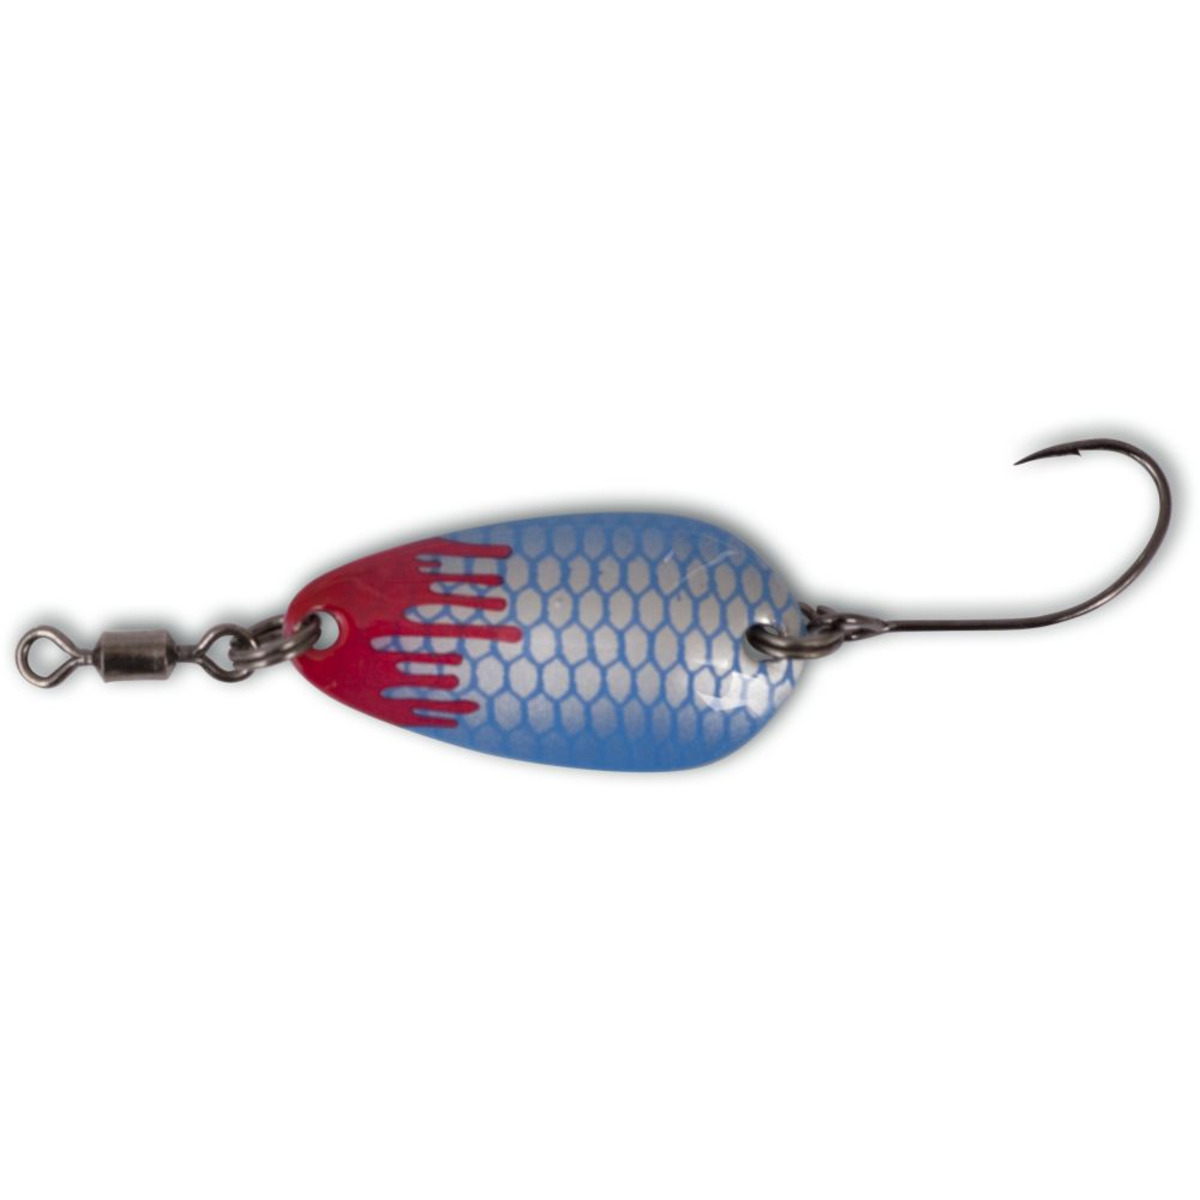 Magic Trout Bloody Loony Spoon - 2 g silver/blue